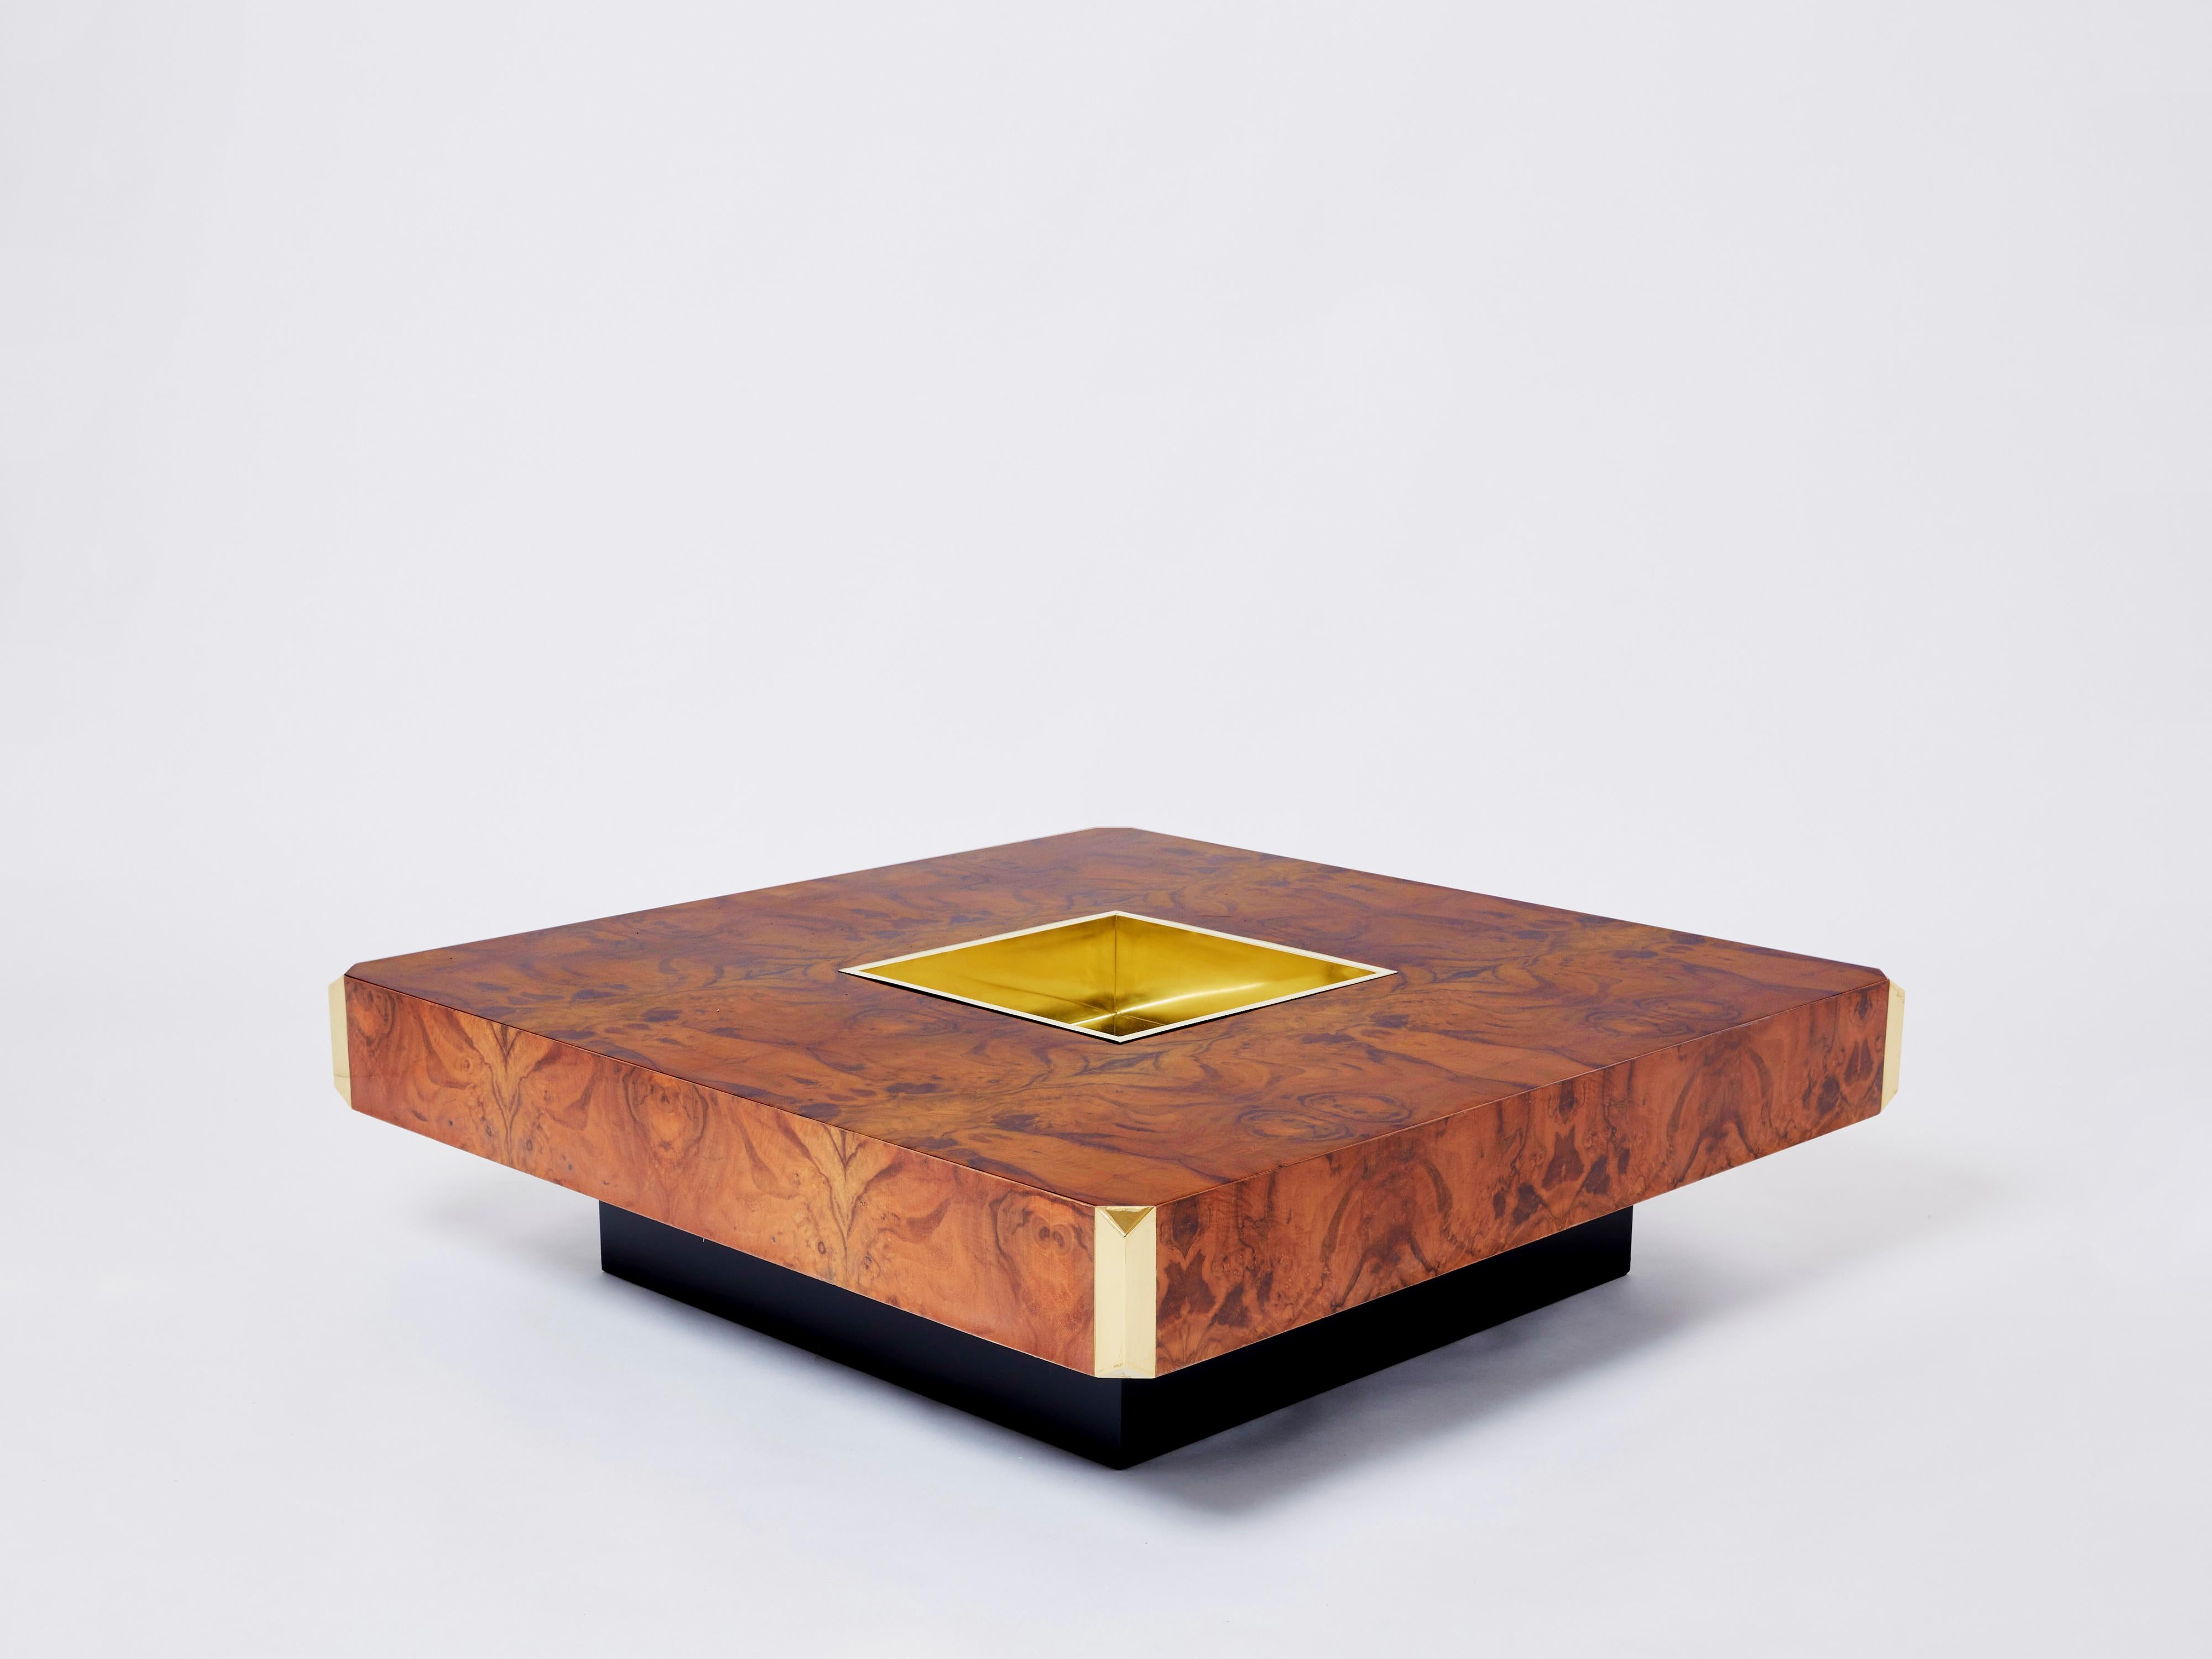 This stunning square Alveo coffee table is guaranteed to be the focus of attention when you entertain guests in your living room. Following the glamorous mid-century look of other classic Willy Rizzo designs, this beautiful burl table is inset with